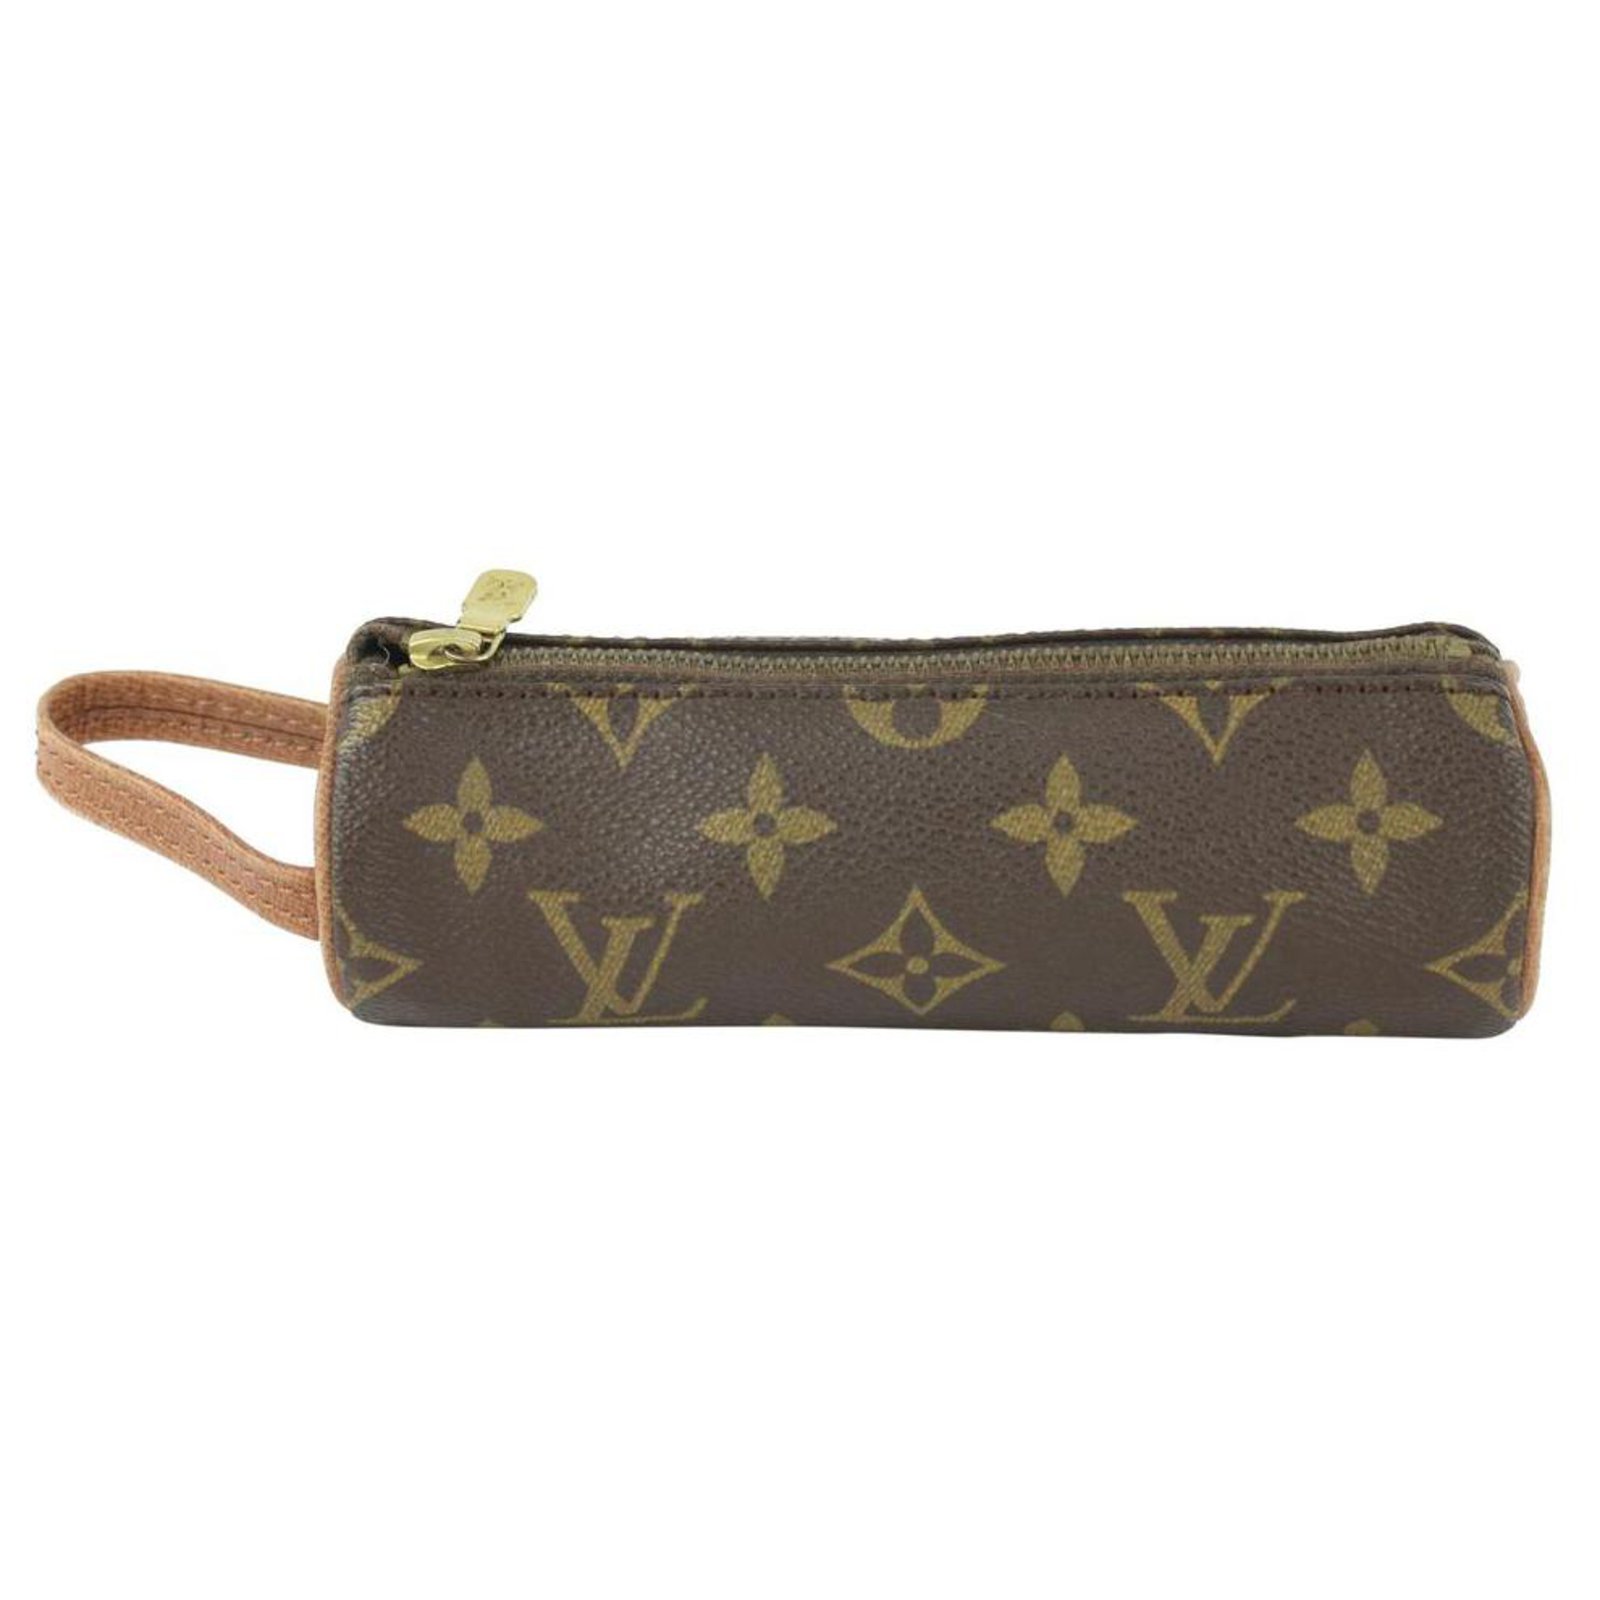 Louis Vuitton Monogram Golf Ball Holder Round Pencil Cate Leather